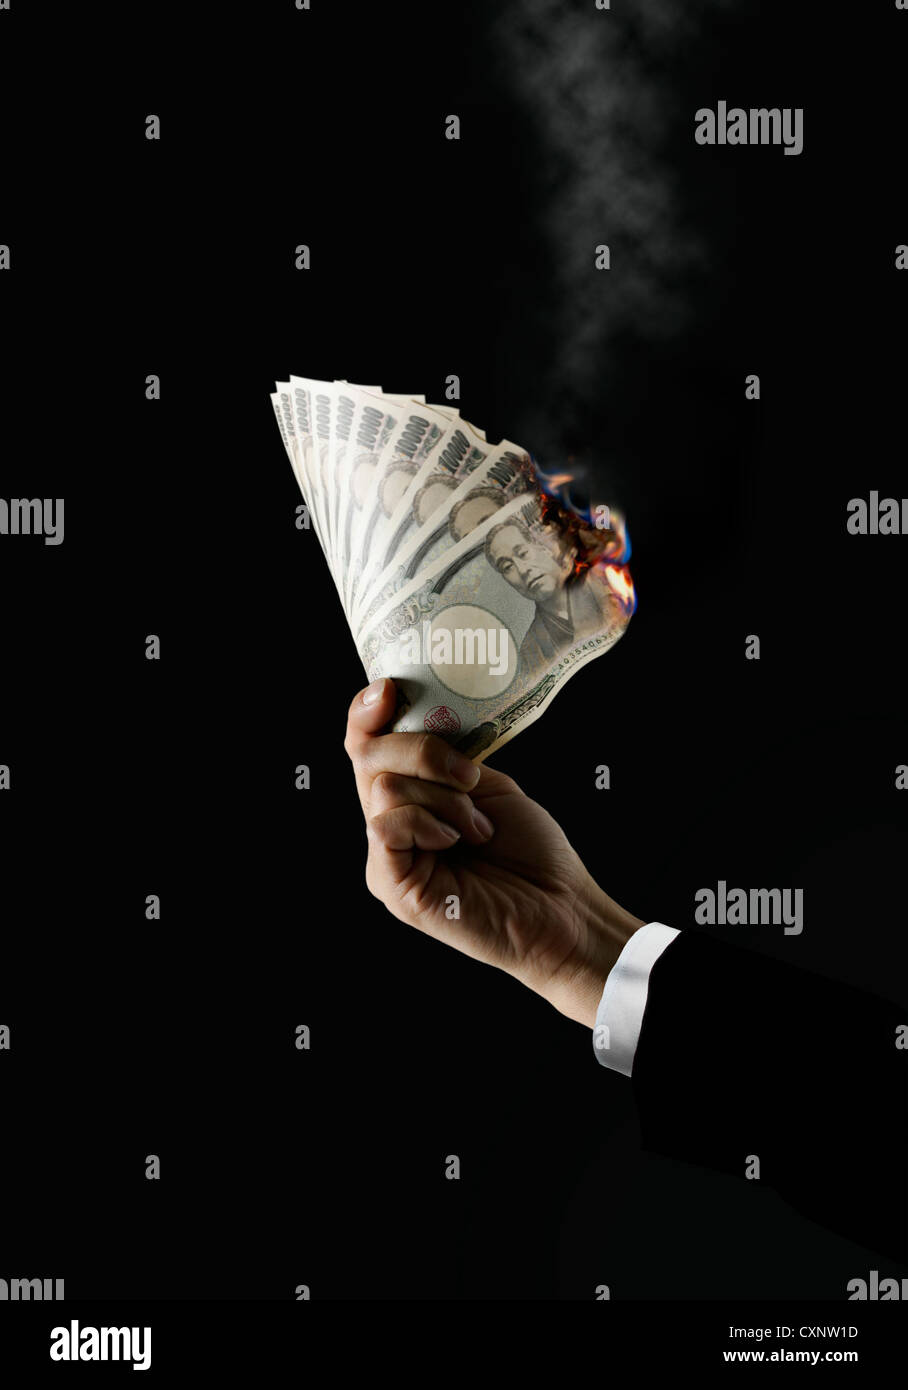 Japanese Bank Notes On Fire Stock Photo